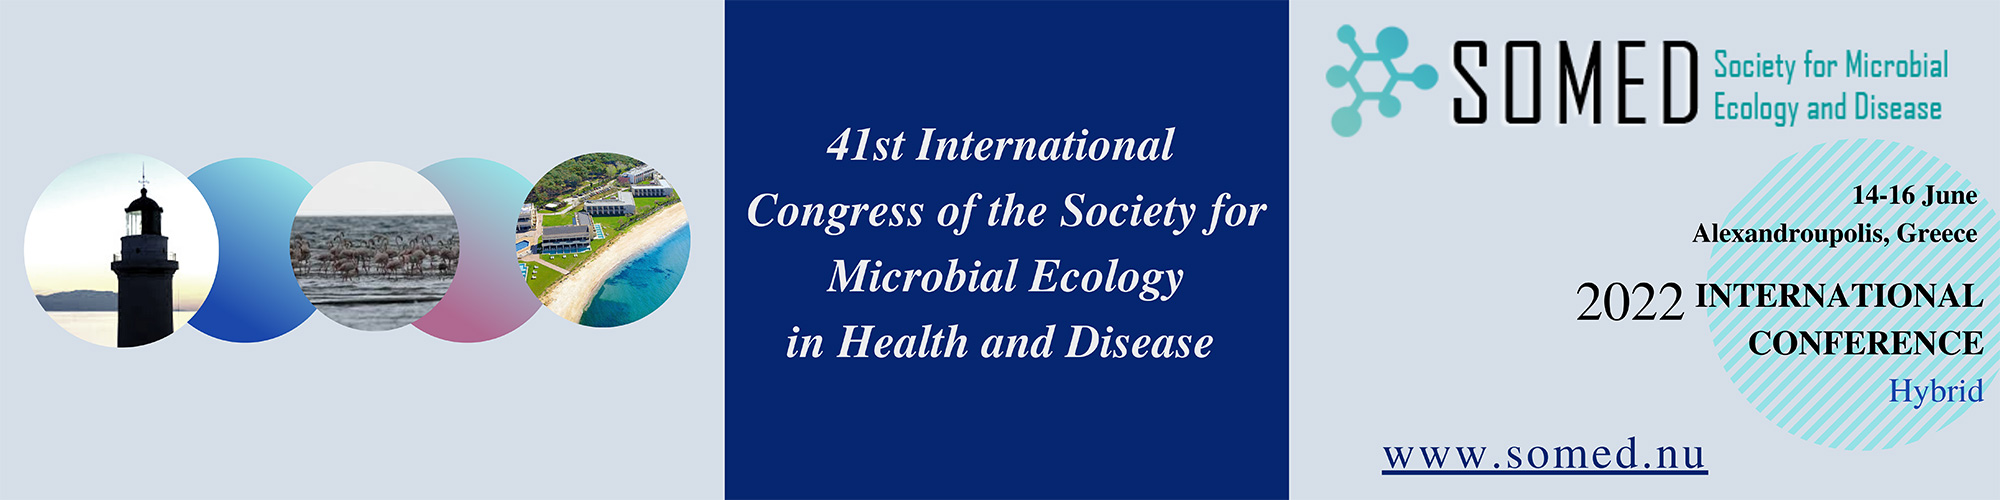 41st INTERNATIONAL CONGRESS OF THE SOCIETY FOR MICROBIAL ECOLOGY IN HEALTH AND DISEASE (SOMED)